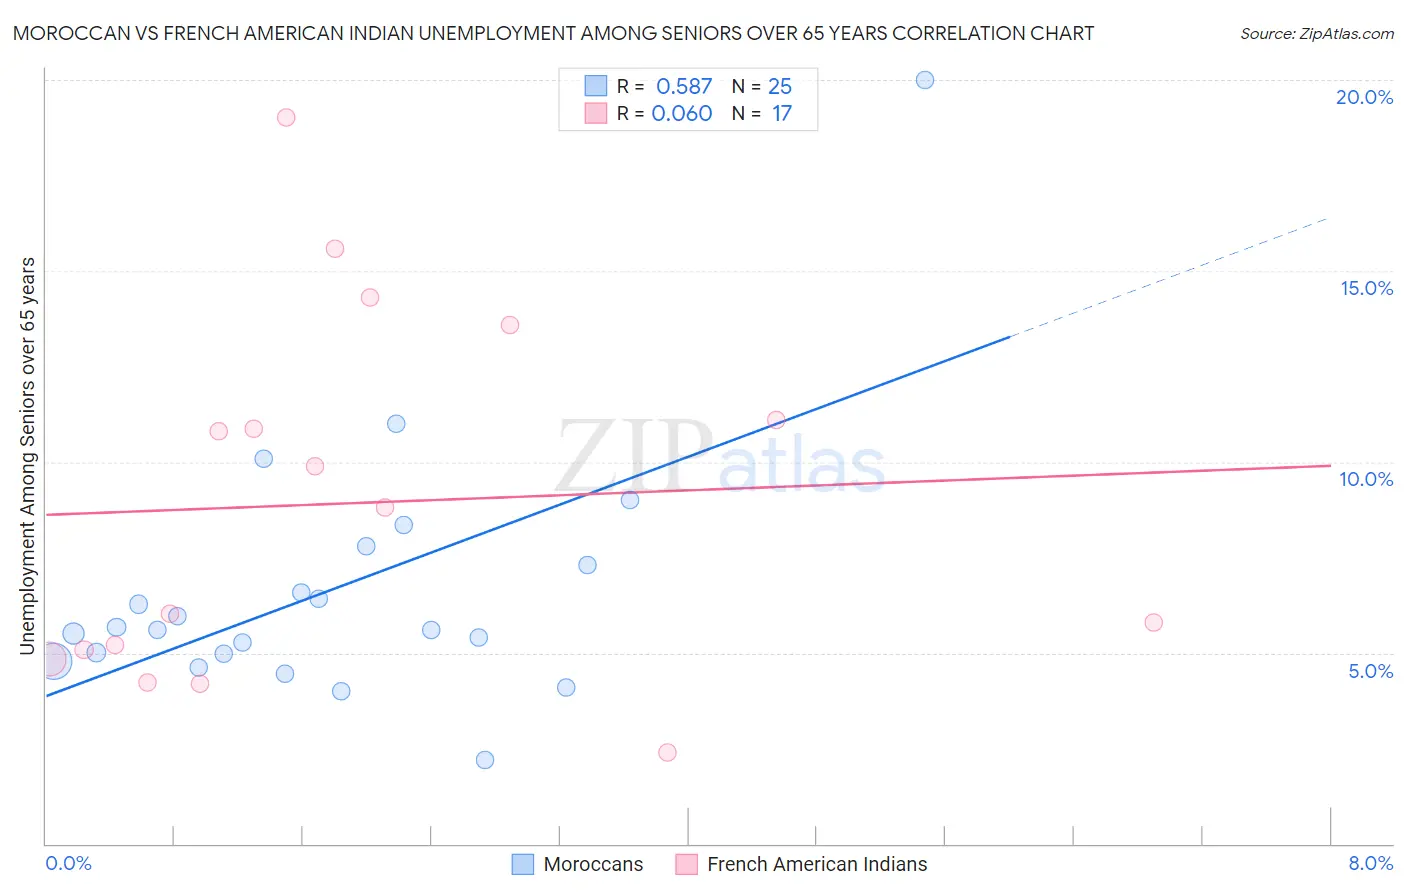 Moroccan vs French American Indian Unemployment Among Seniors over 65 years